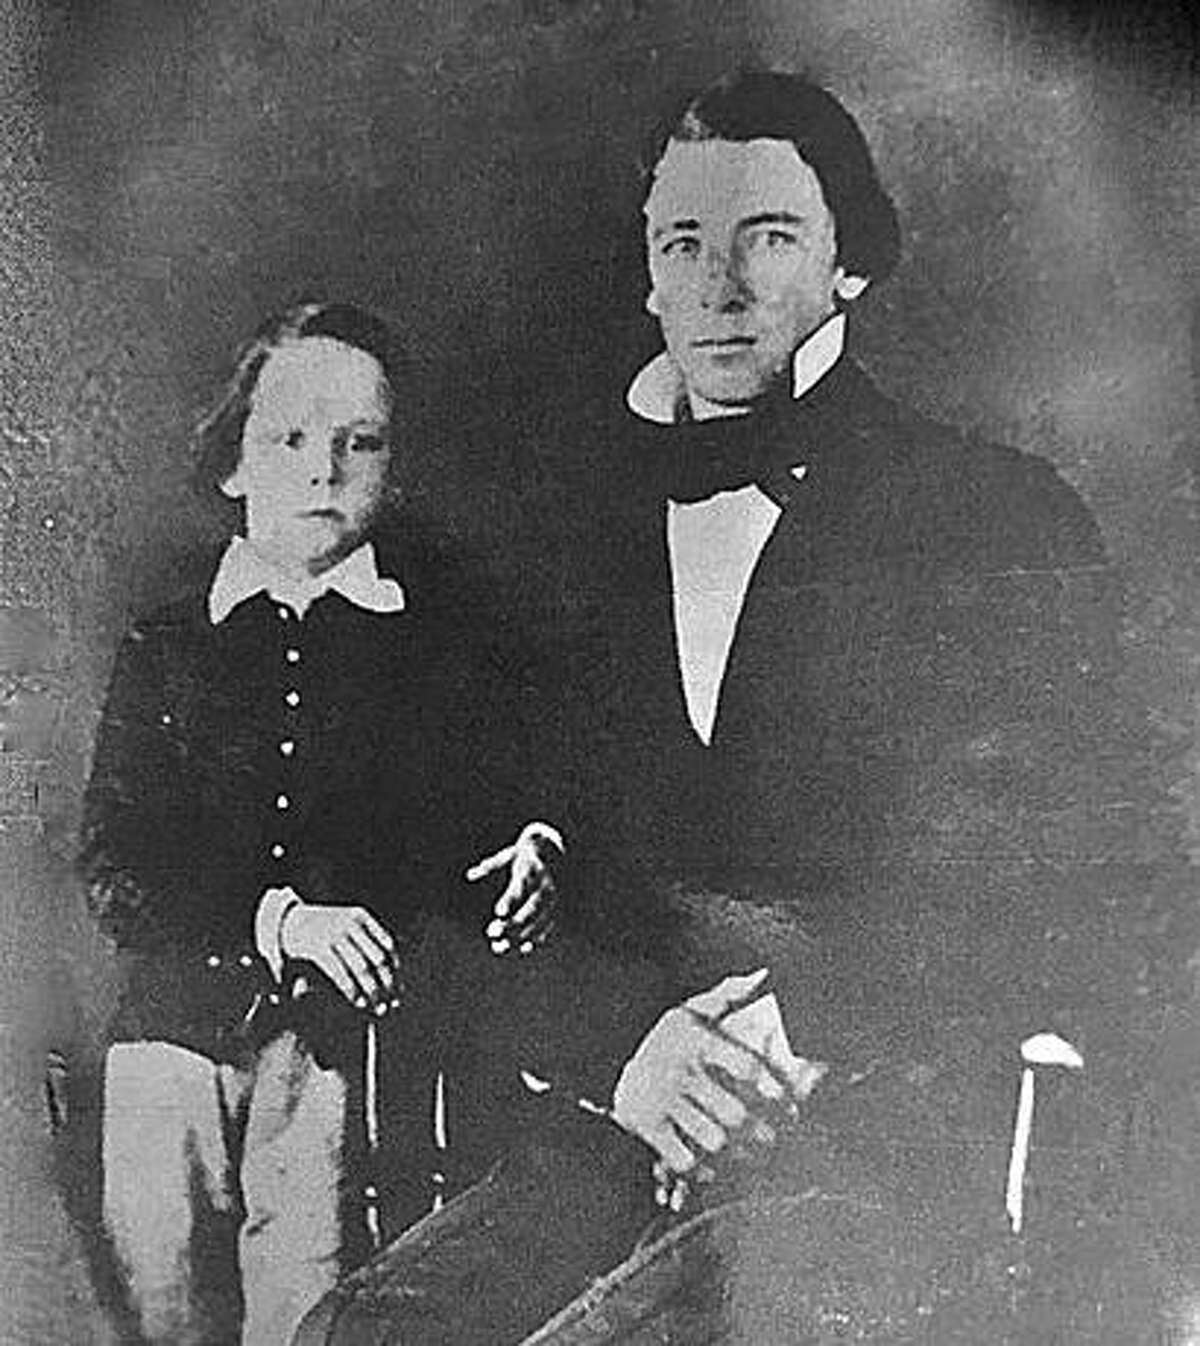 This photograph of John M. and Antonio Smith was processed by Fox Photo, which grew from a single storefront to a nationwide powerhouse in photo processing.